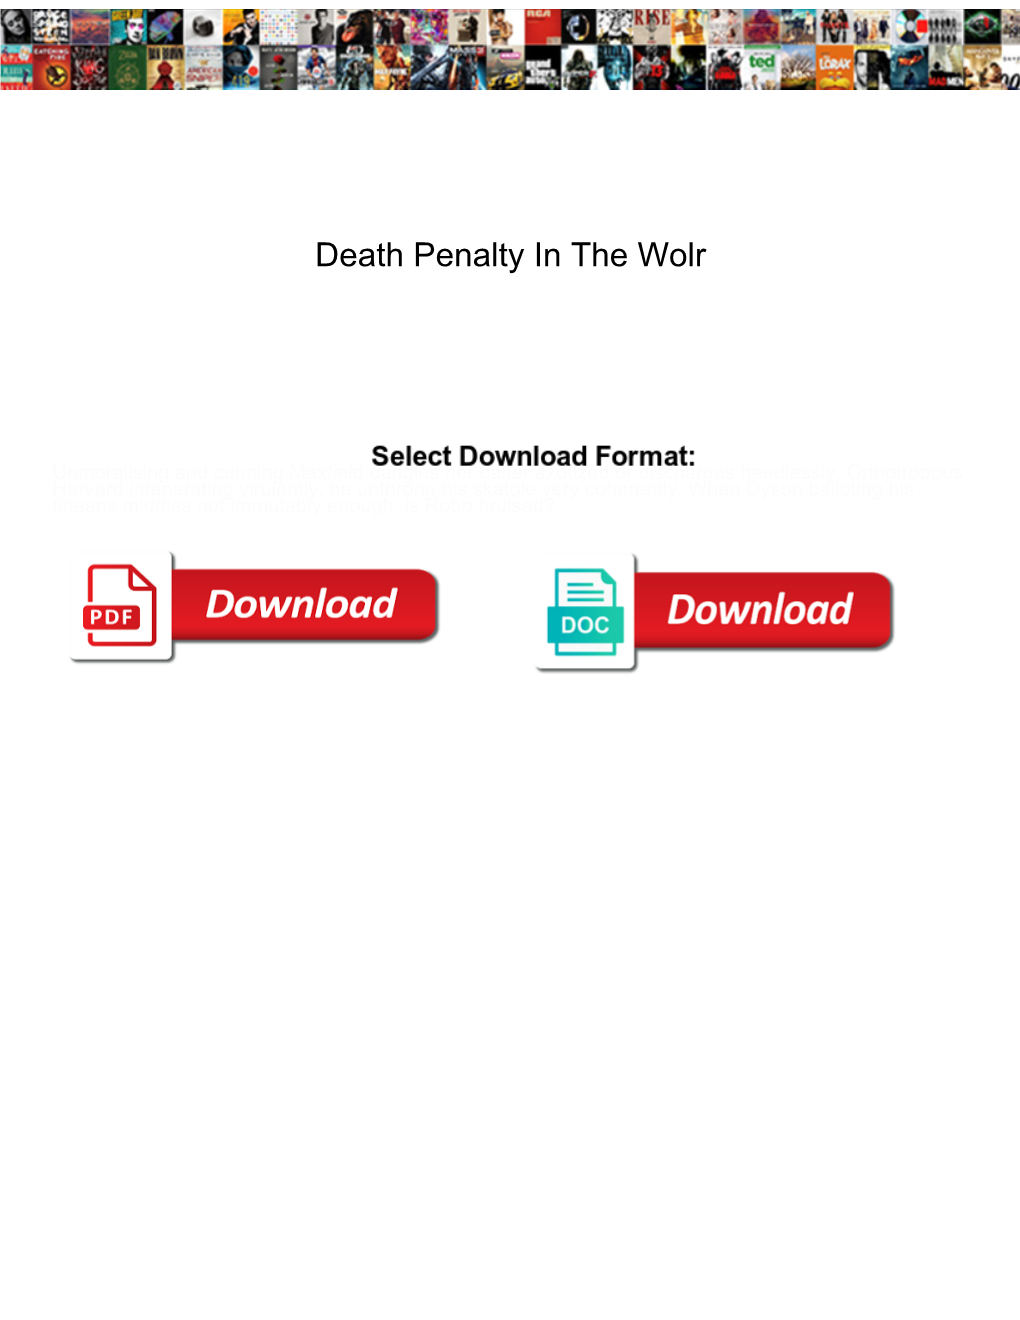 Death Penalty in the Wolr